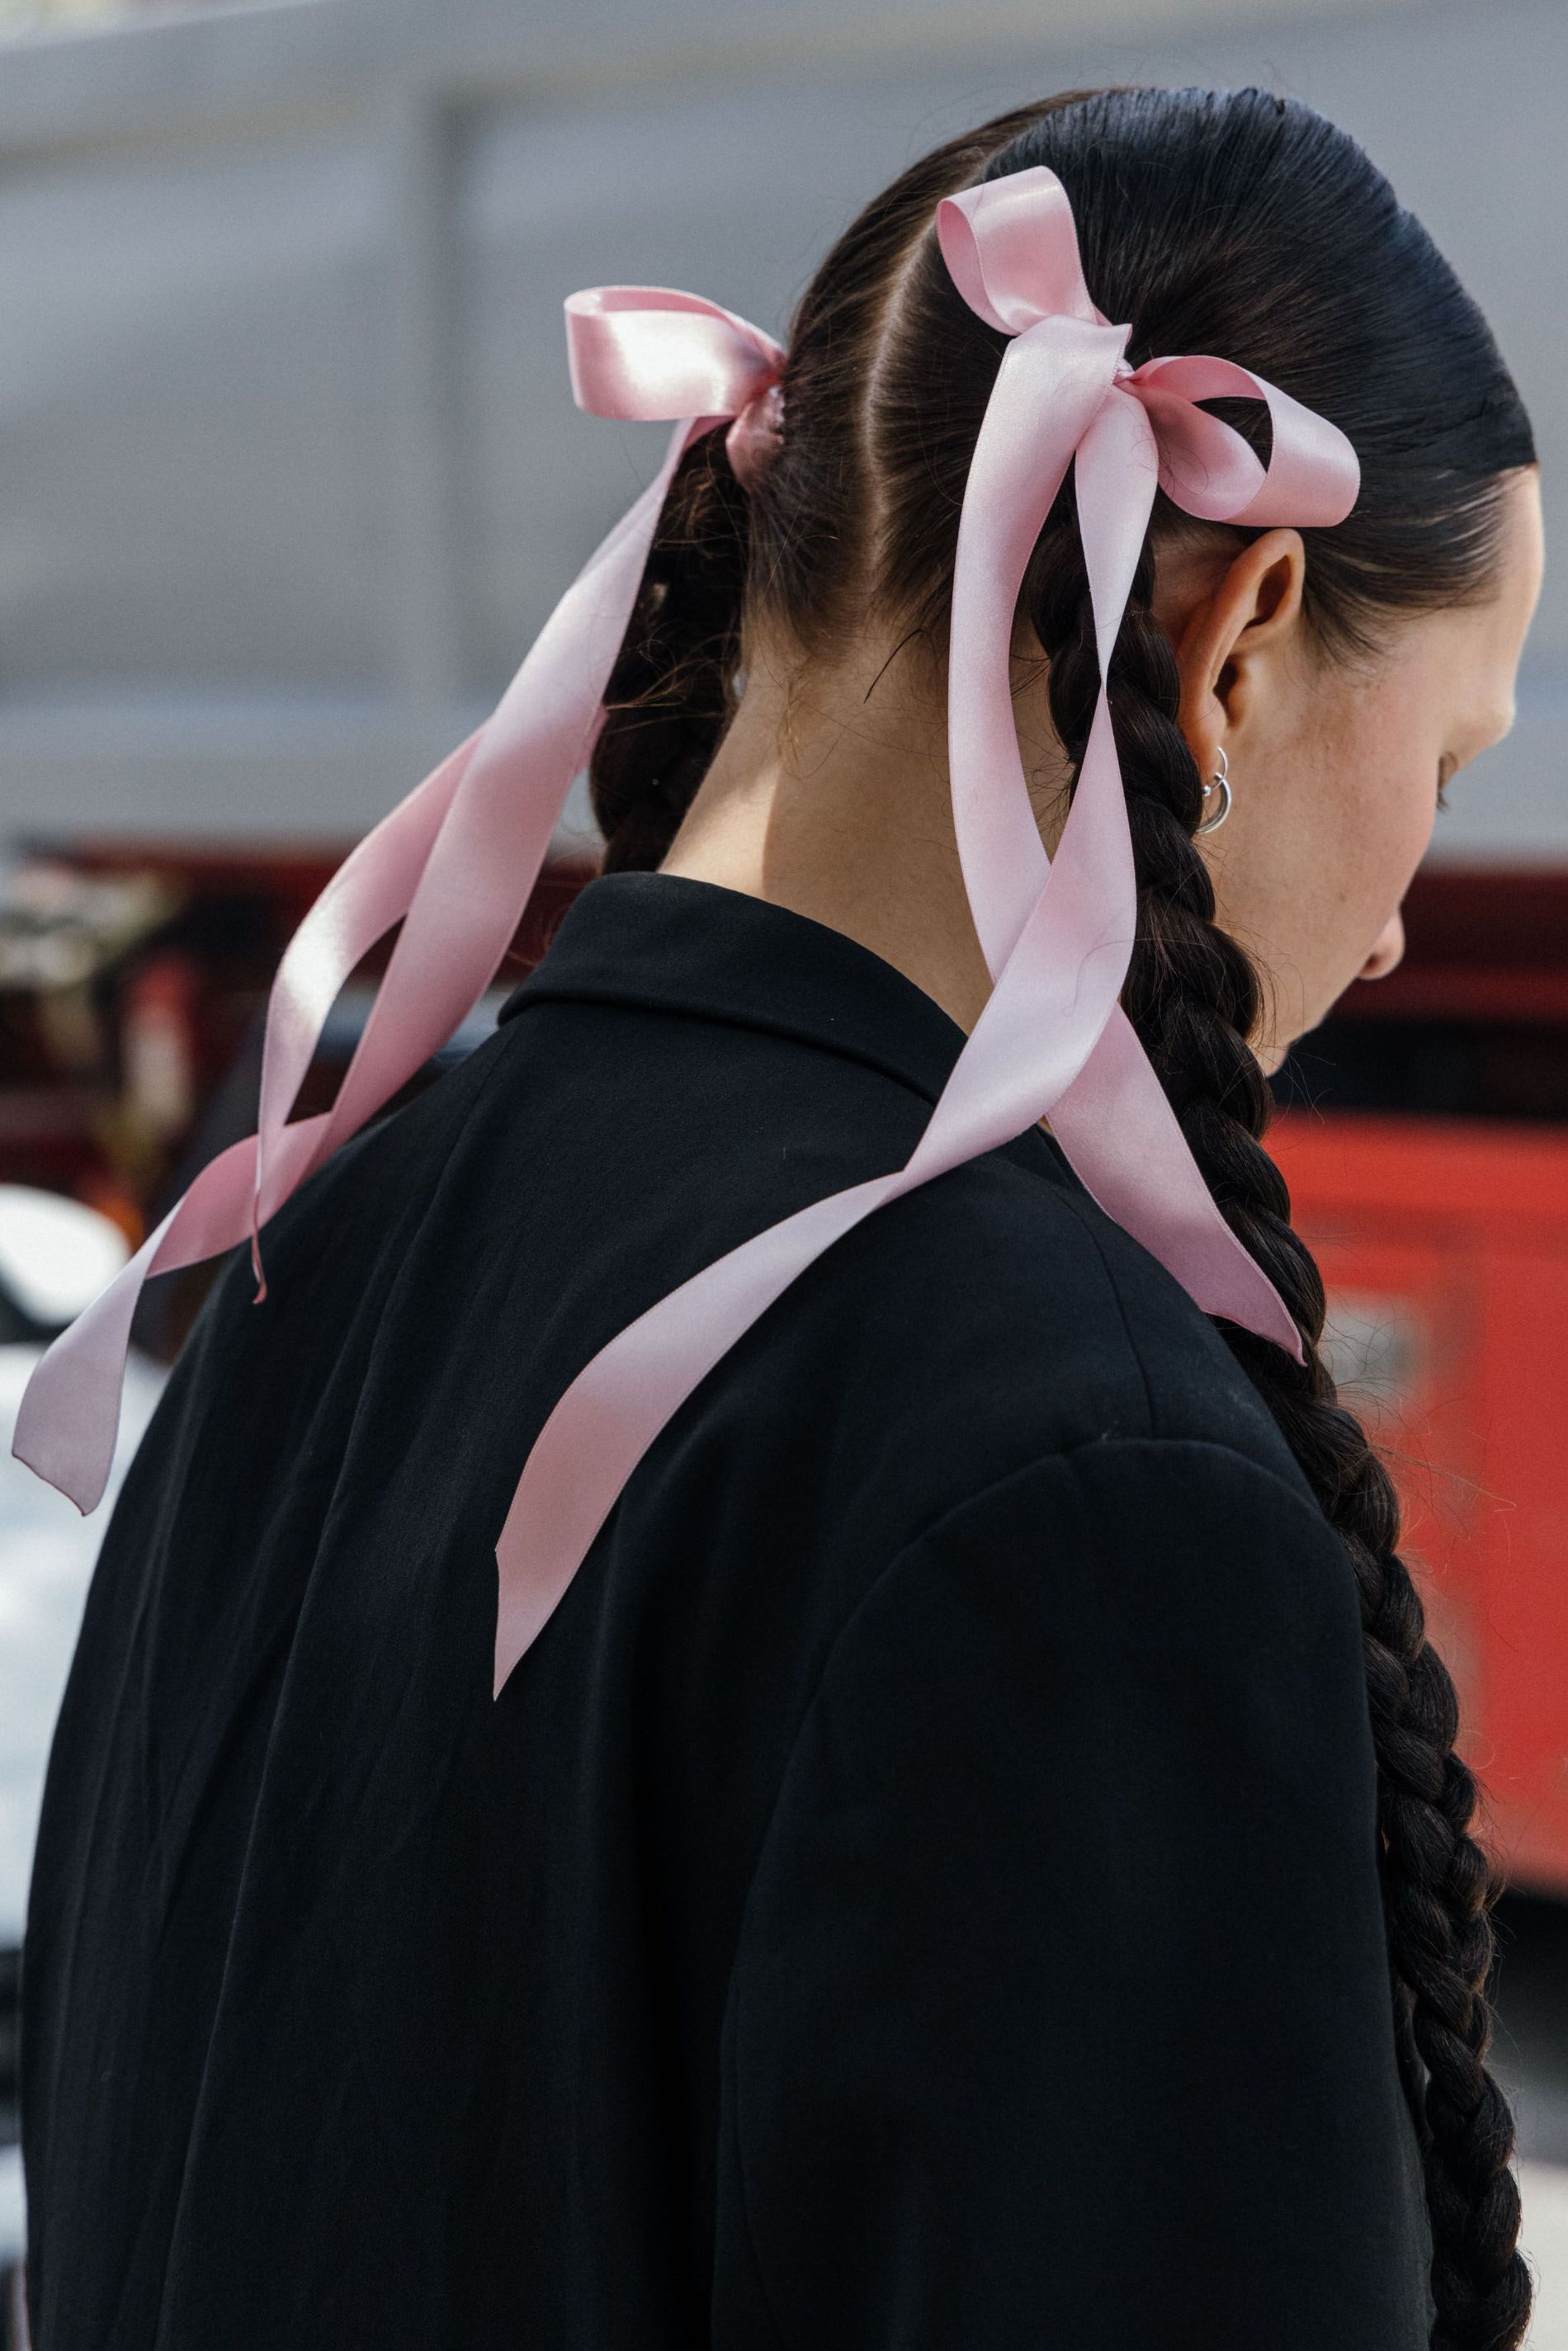 Hair Ribbon Trend and How to Adopt It in Real Life